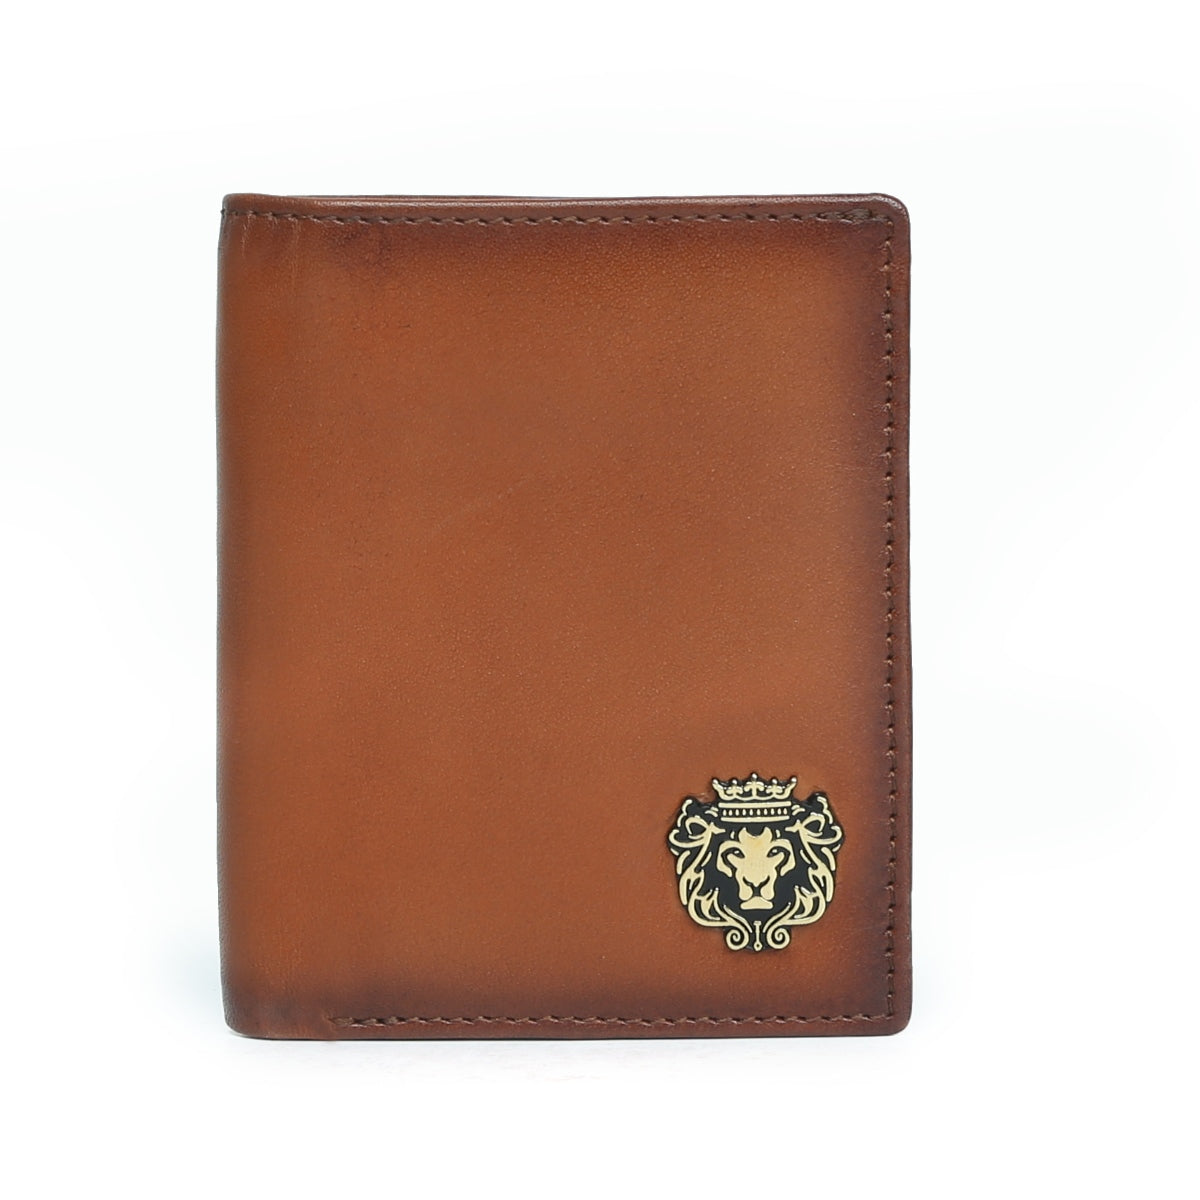 Tan Leather Two Fold Wallet With Coin Pocket & Multiple card Slots By Brune & Bareskin